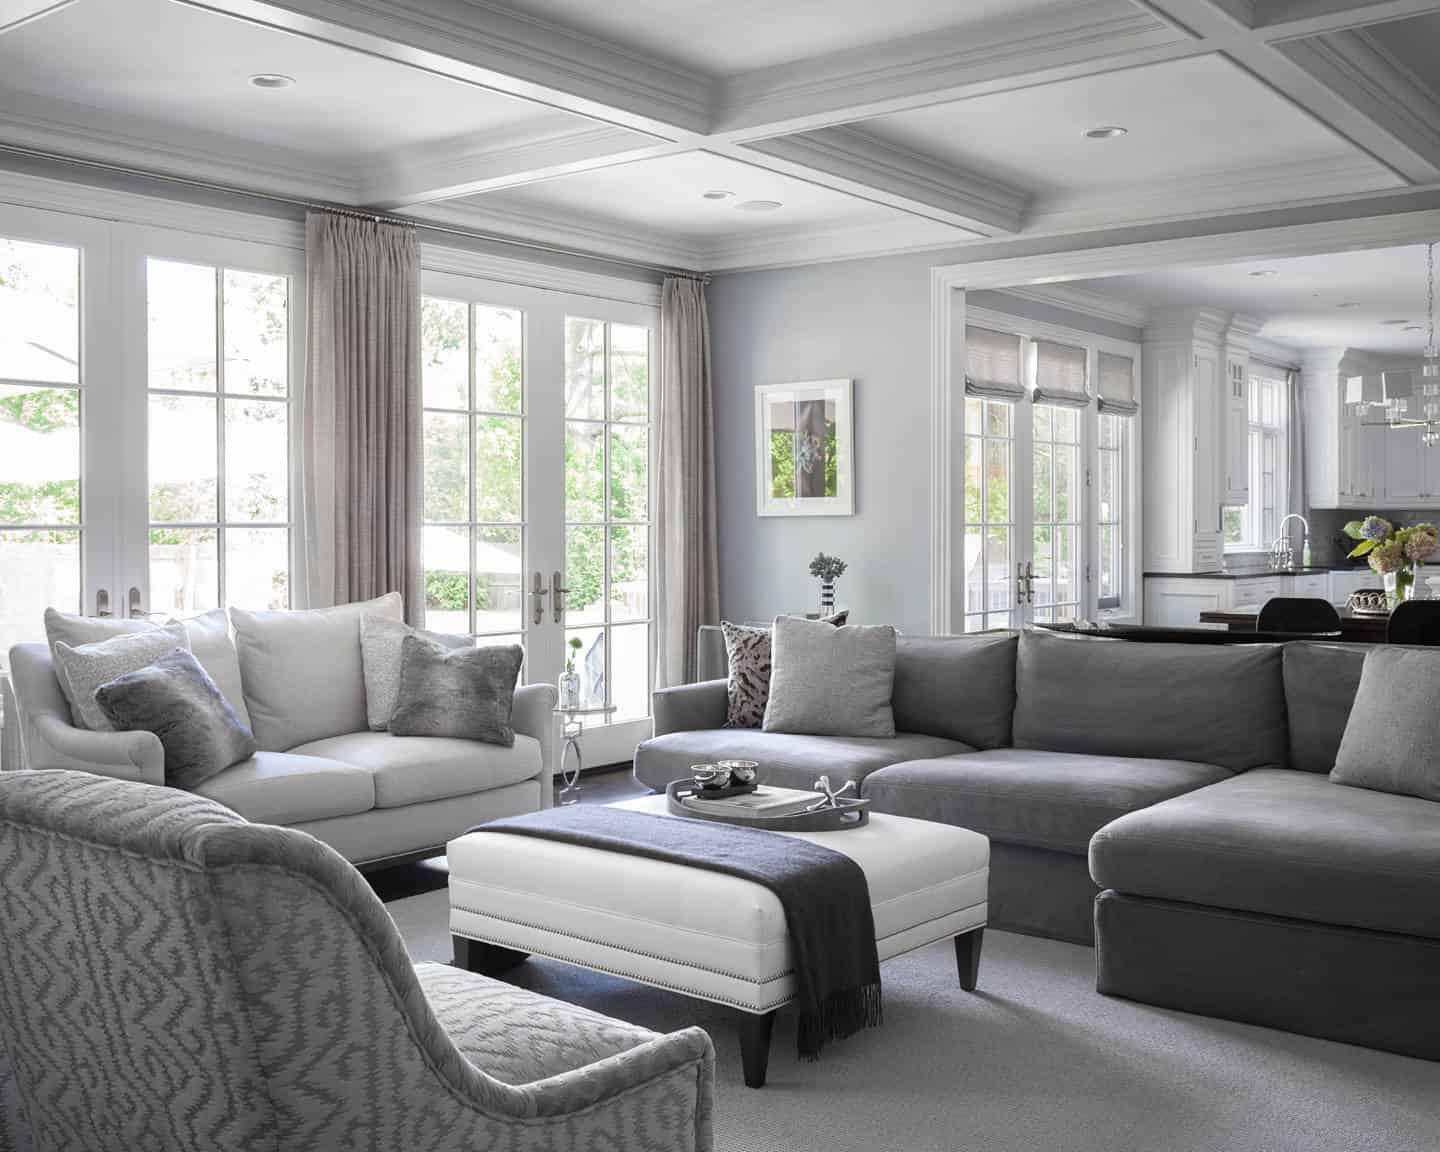 27 Modern Gray Living Room Ideas for a Stylish Home (2021 EDITION)